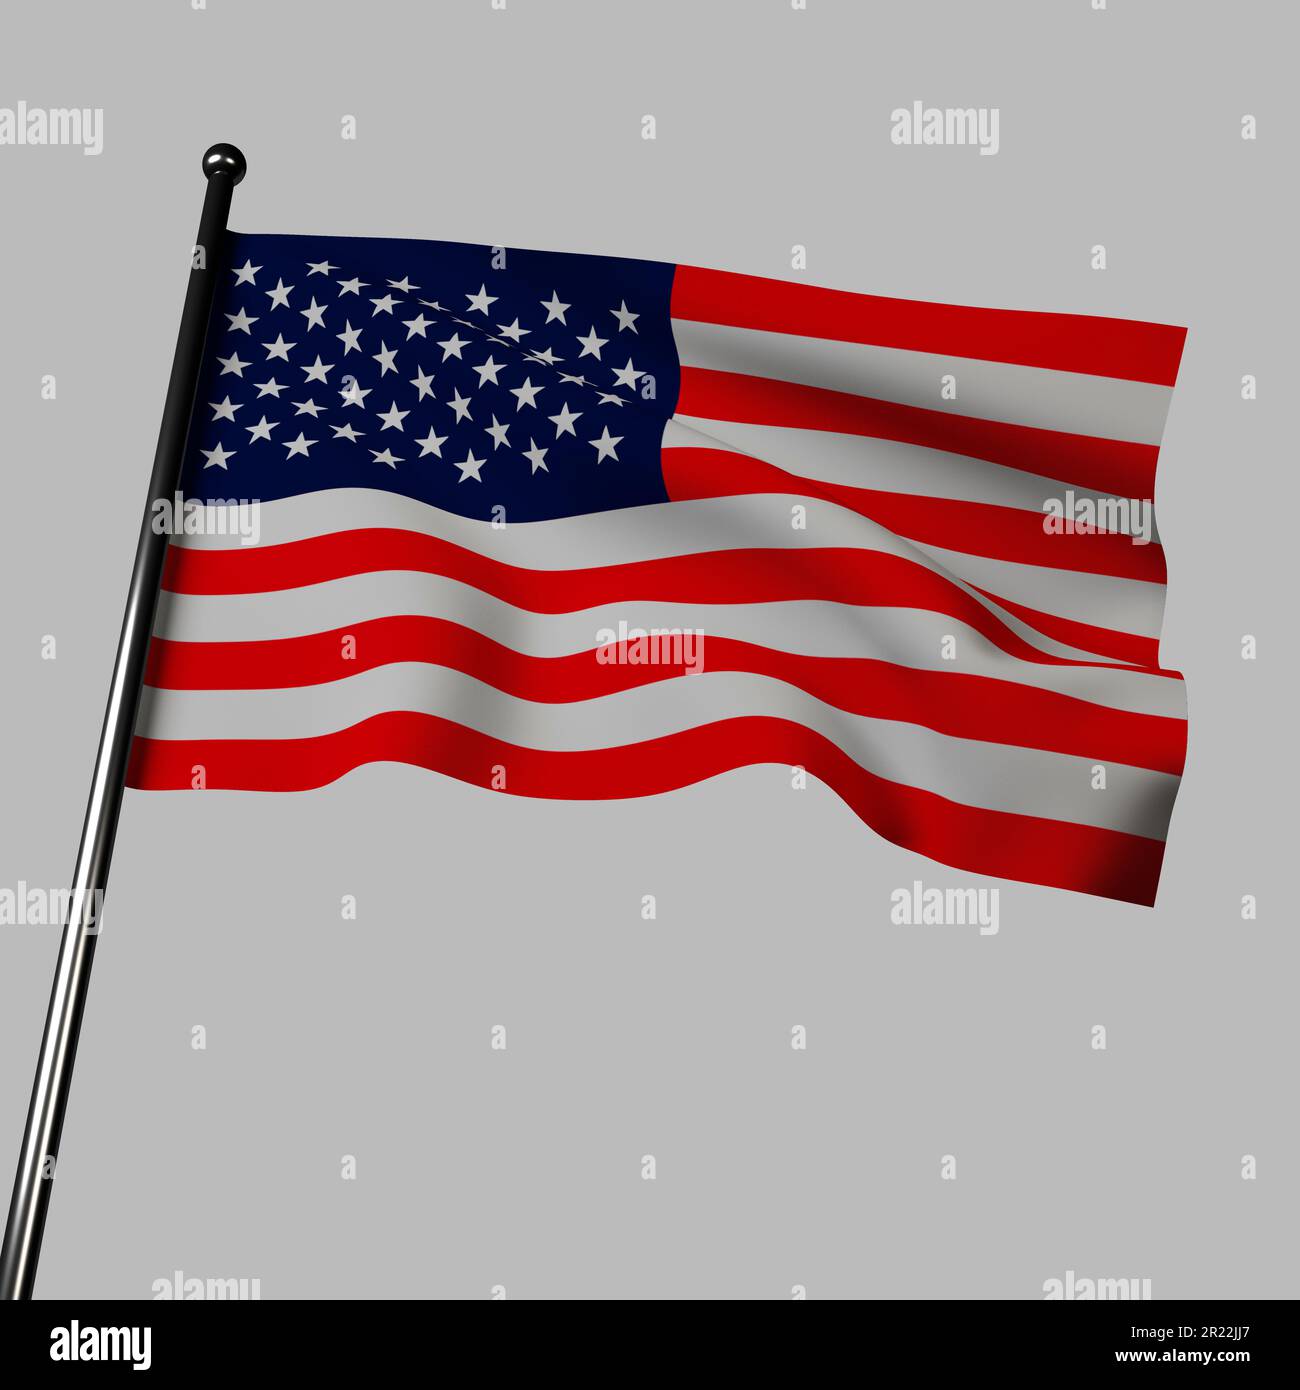 The American flag waves in 3D on gray. It has alternating red and white stripes, for valor and purity, with a blue field in the corner, representing l Stock Photo